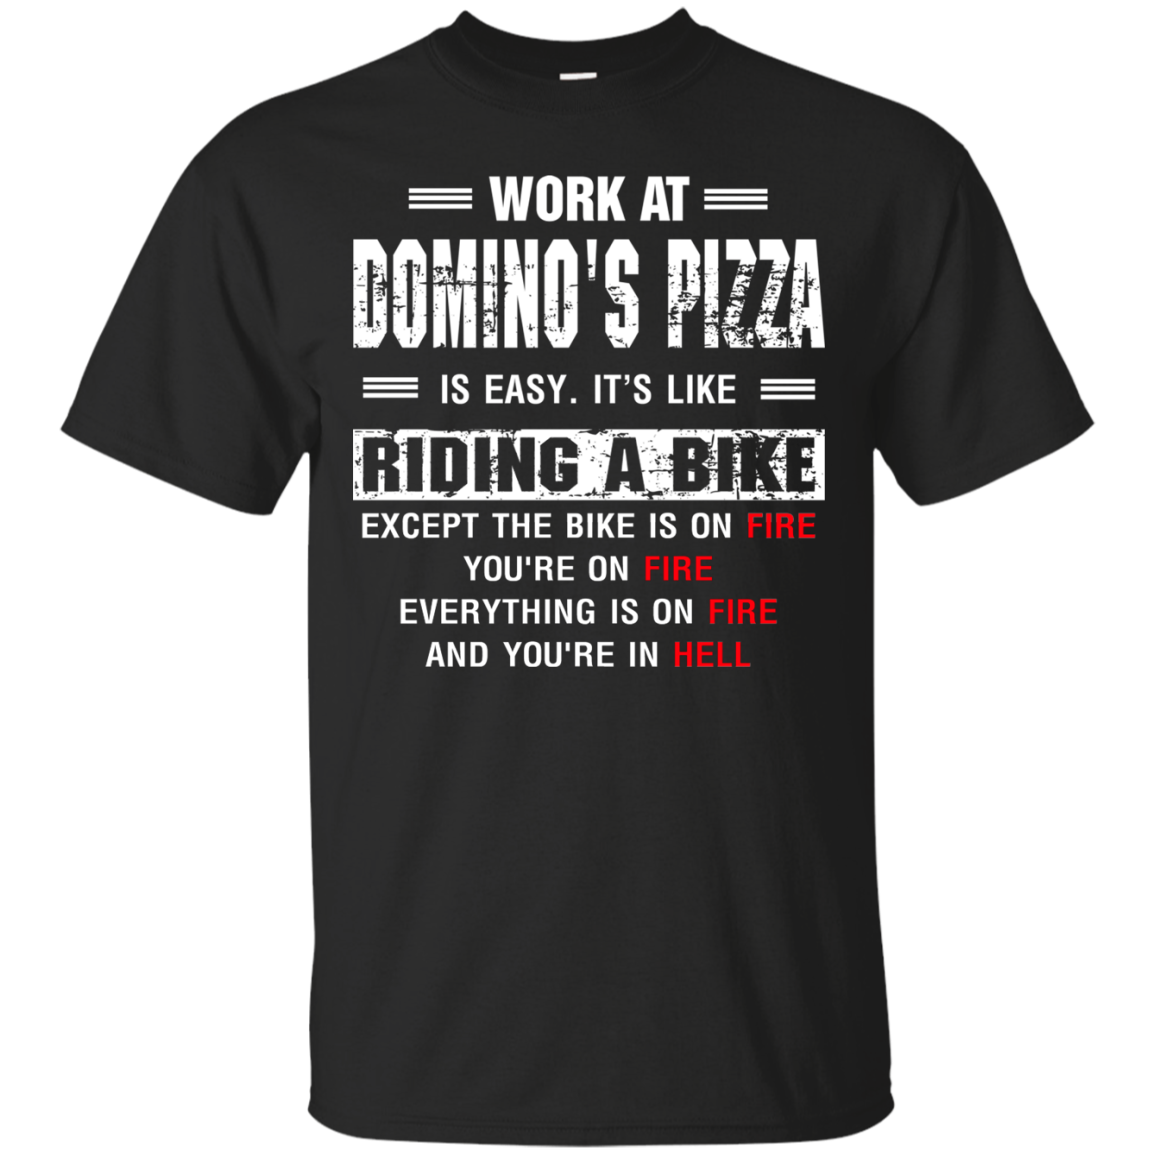 Domino's Pizza Worker Shirts It's Like Riding A Bike - Teesmiley